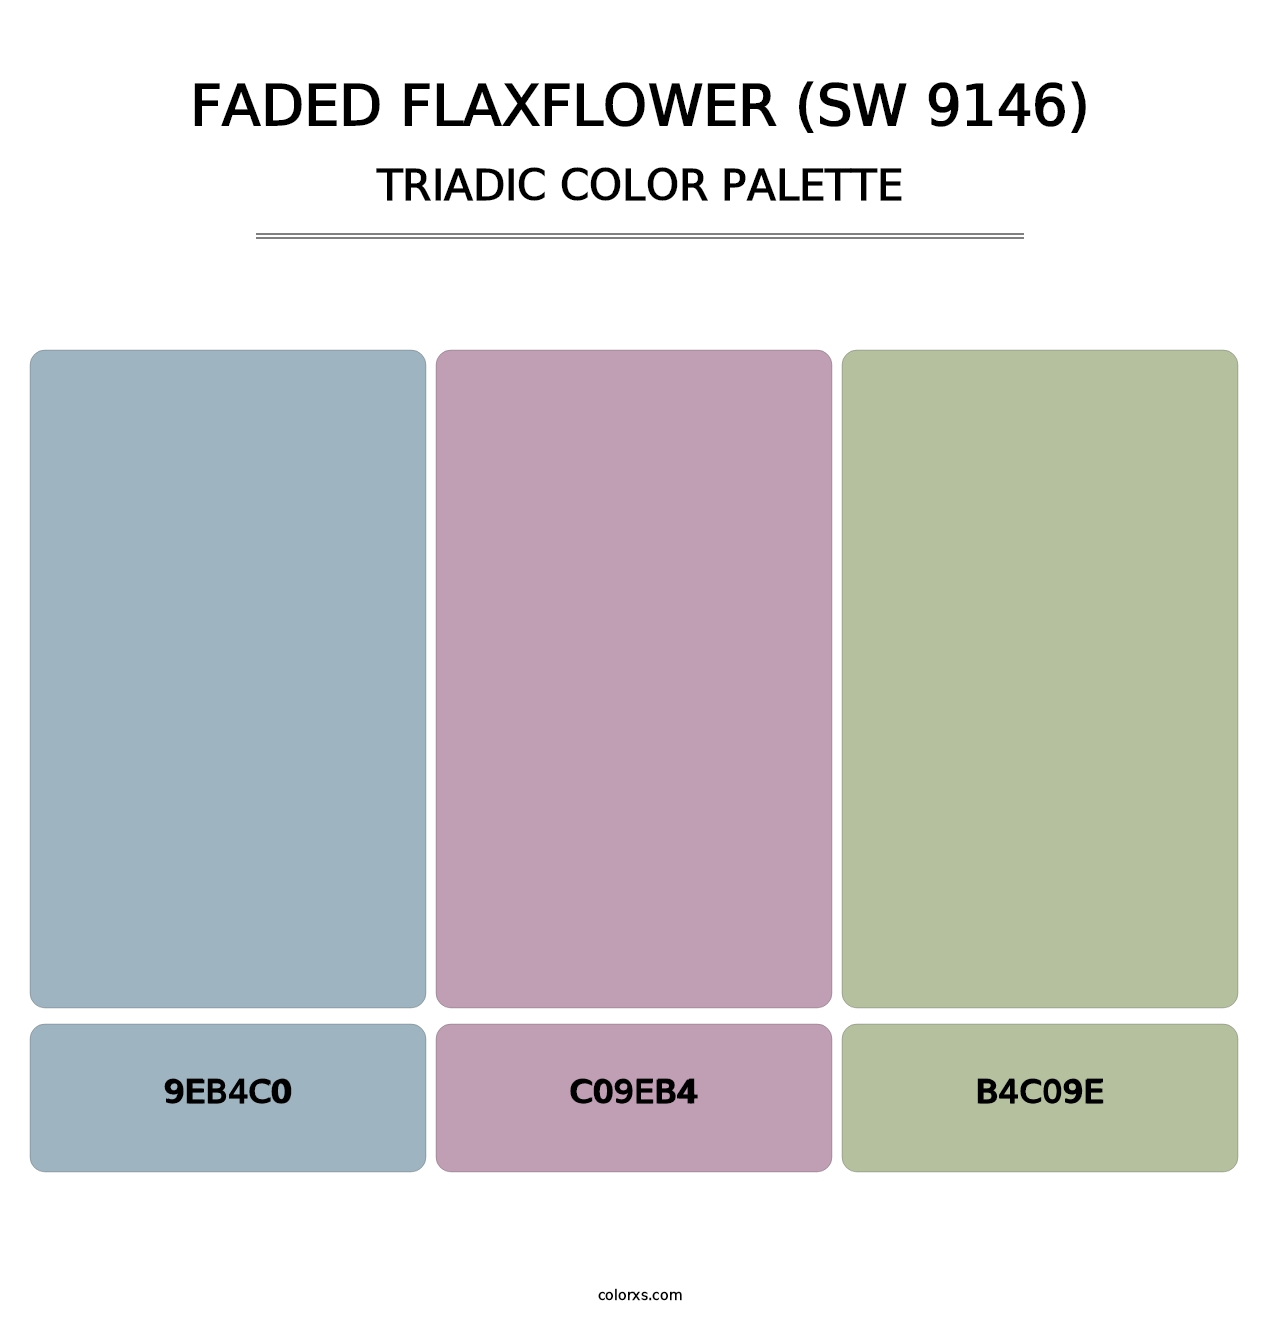 Faded Flaxflower (SW 9146) - Triadic Color Palette